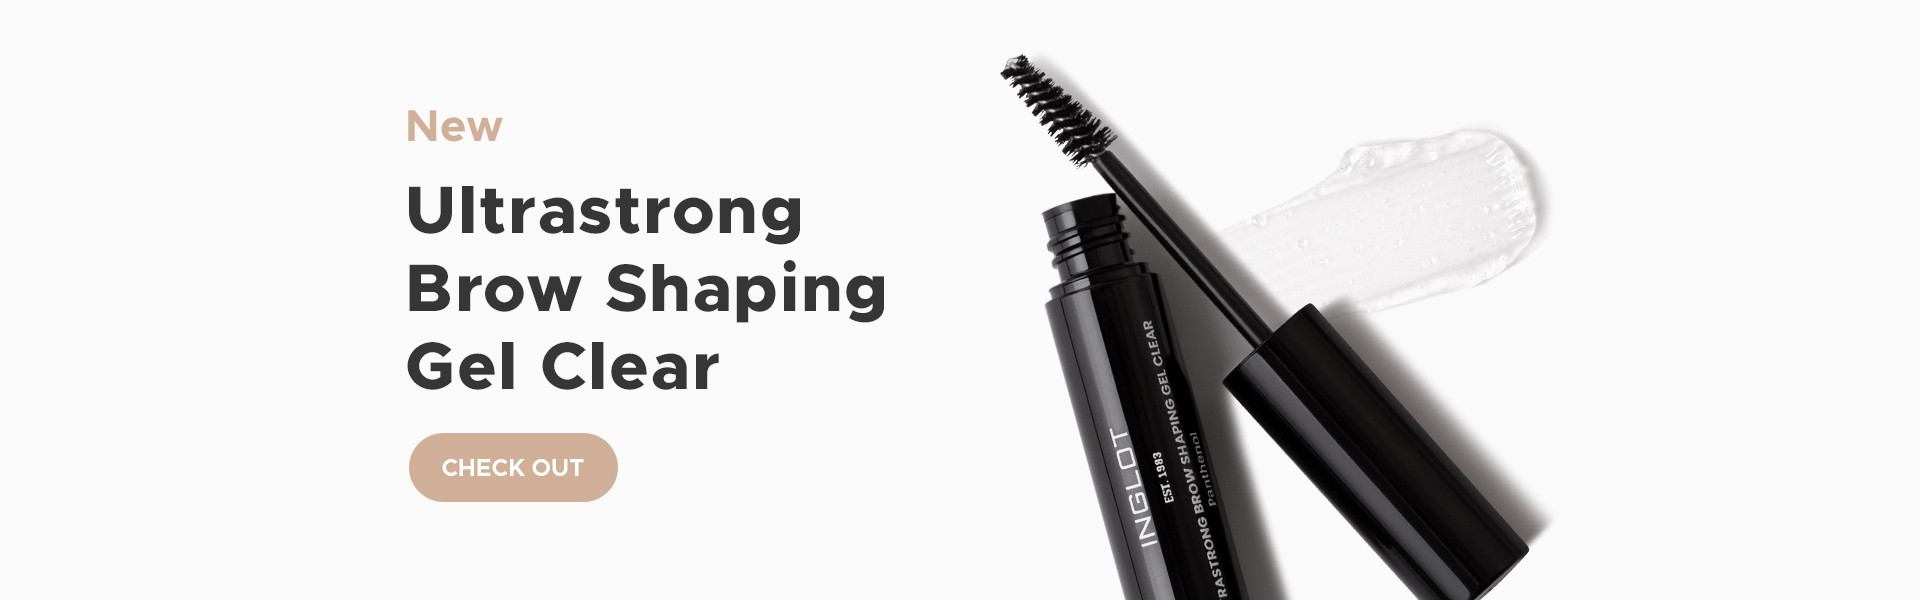 Ultrastrong Brow Shaping Gel Clear